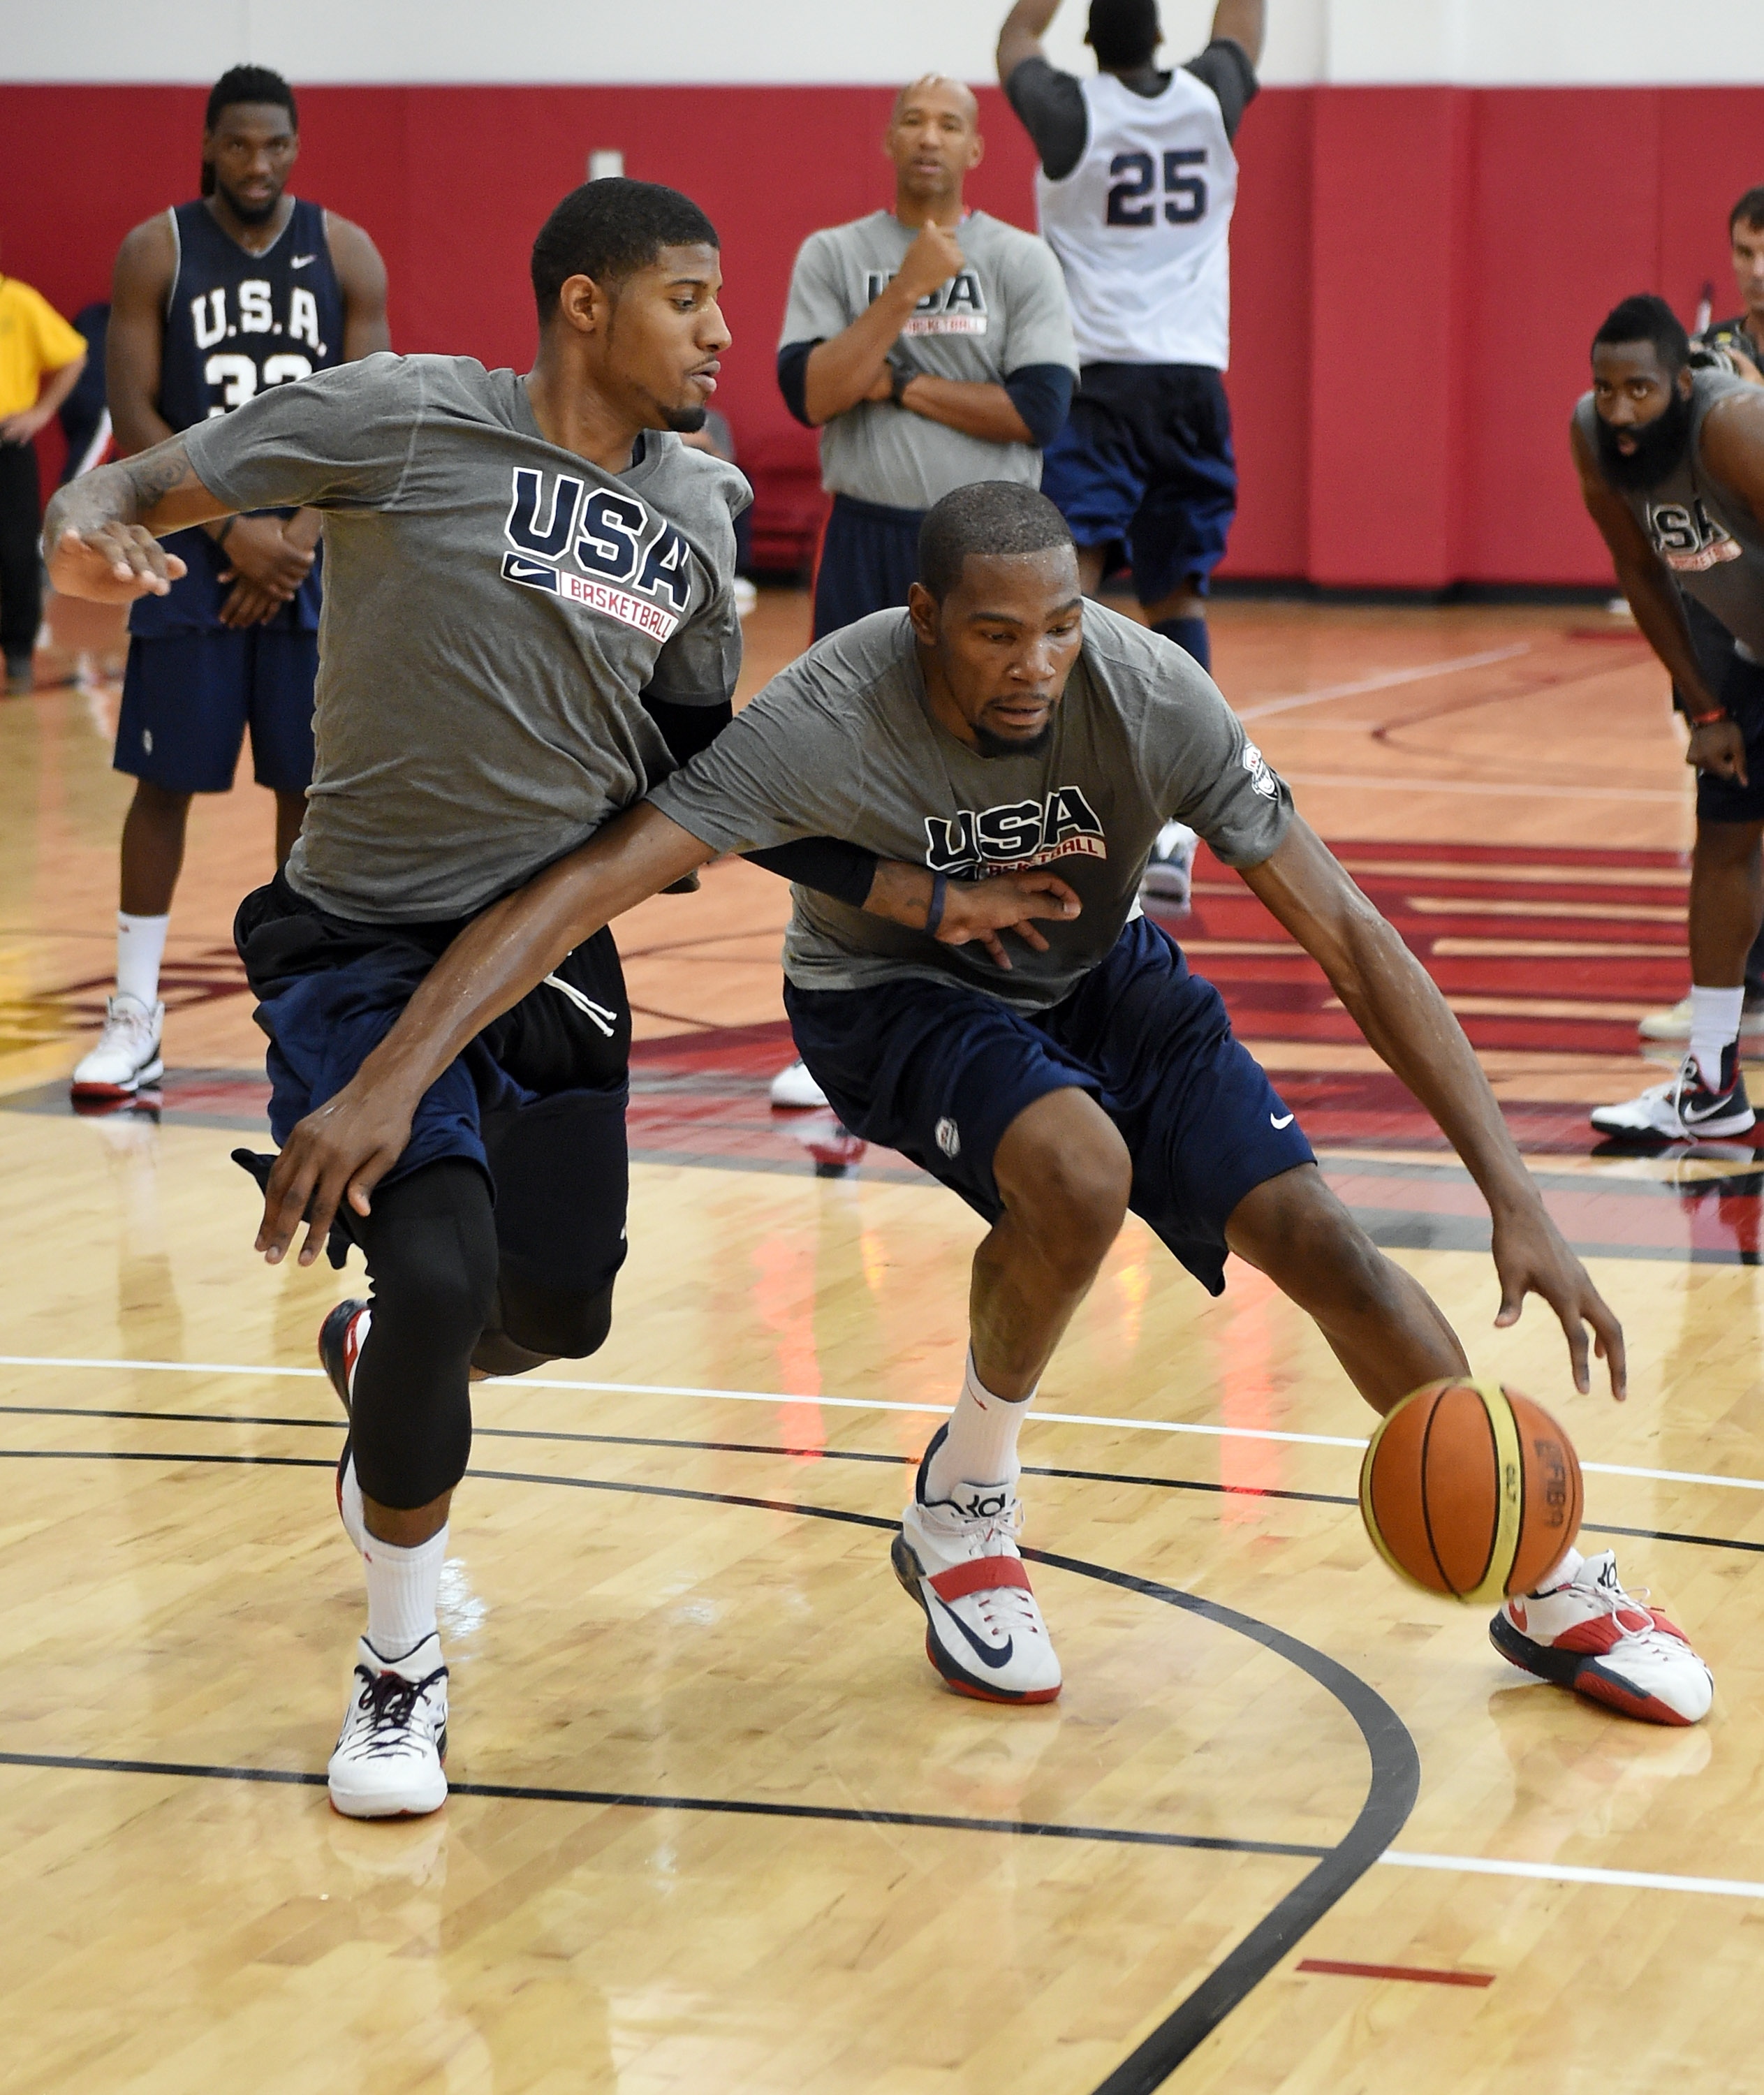 Paul George defends Kevin Durant during a Team USA practice session on July 30, 2014. (Ethan Miller/Getty Images)